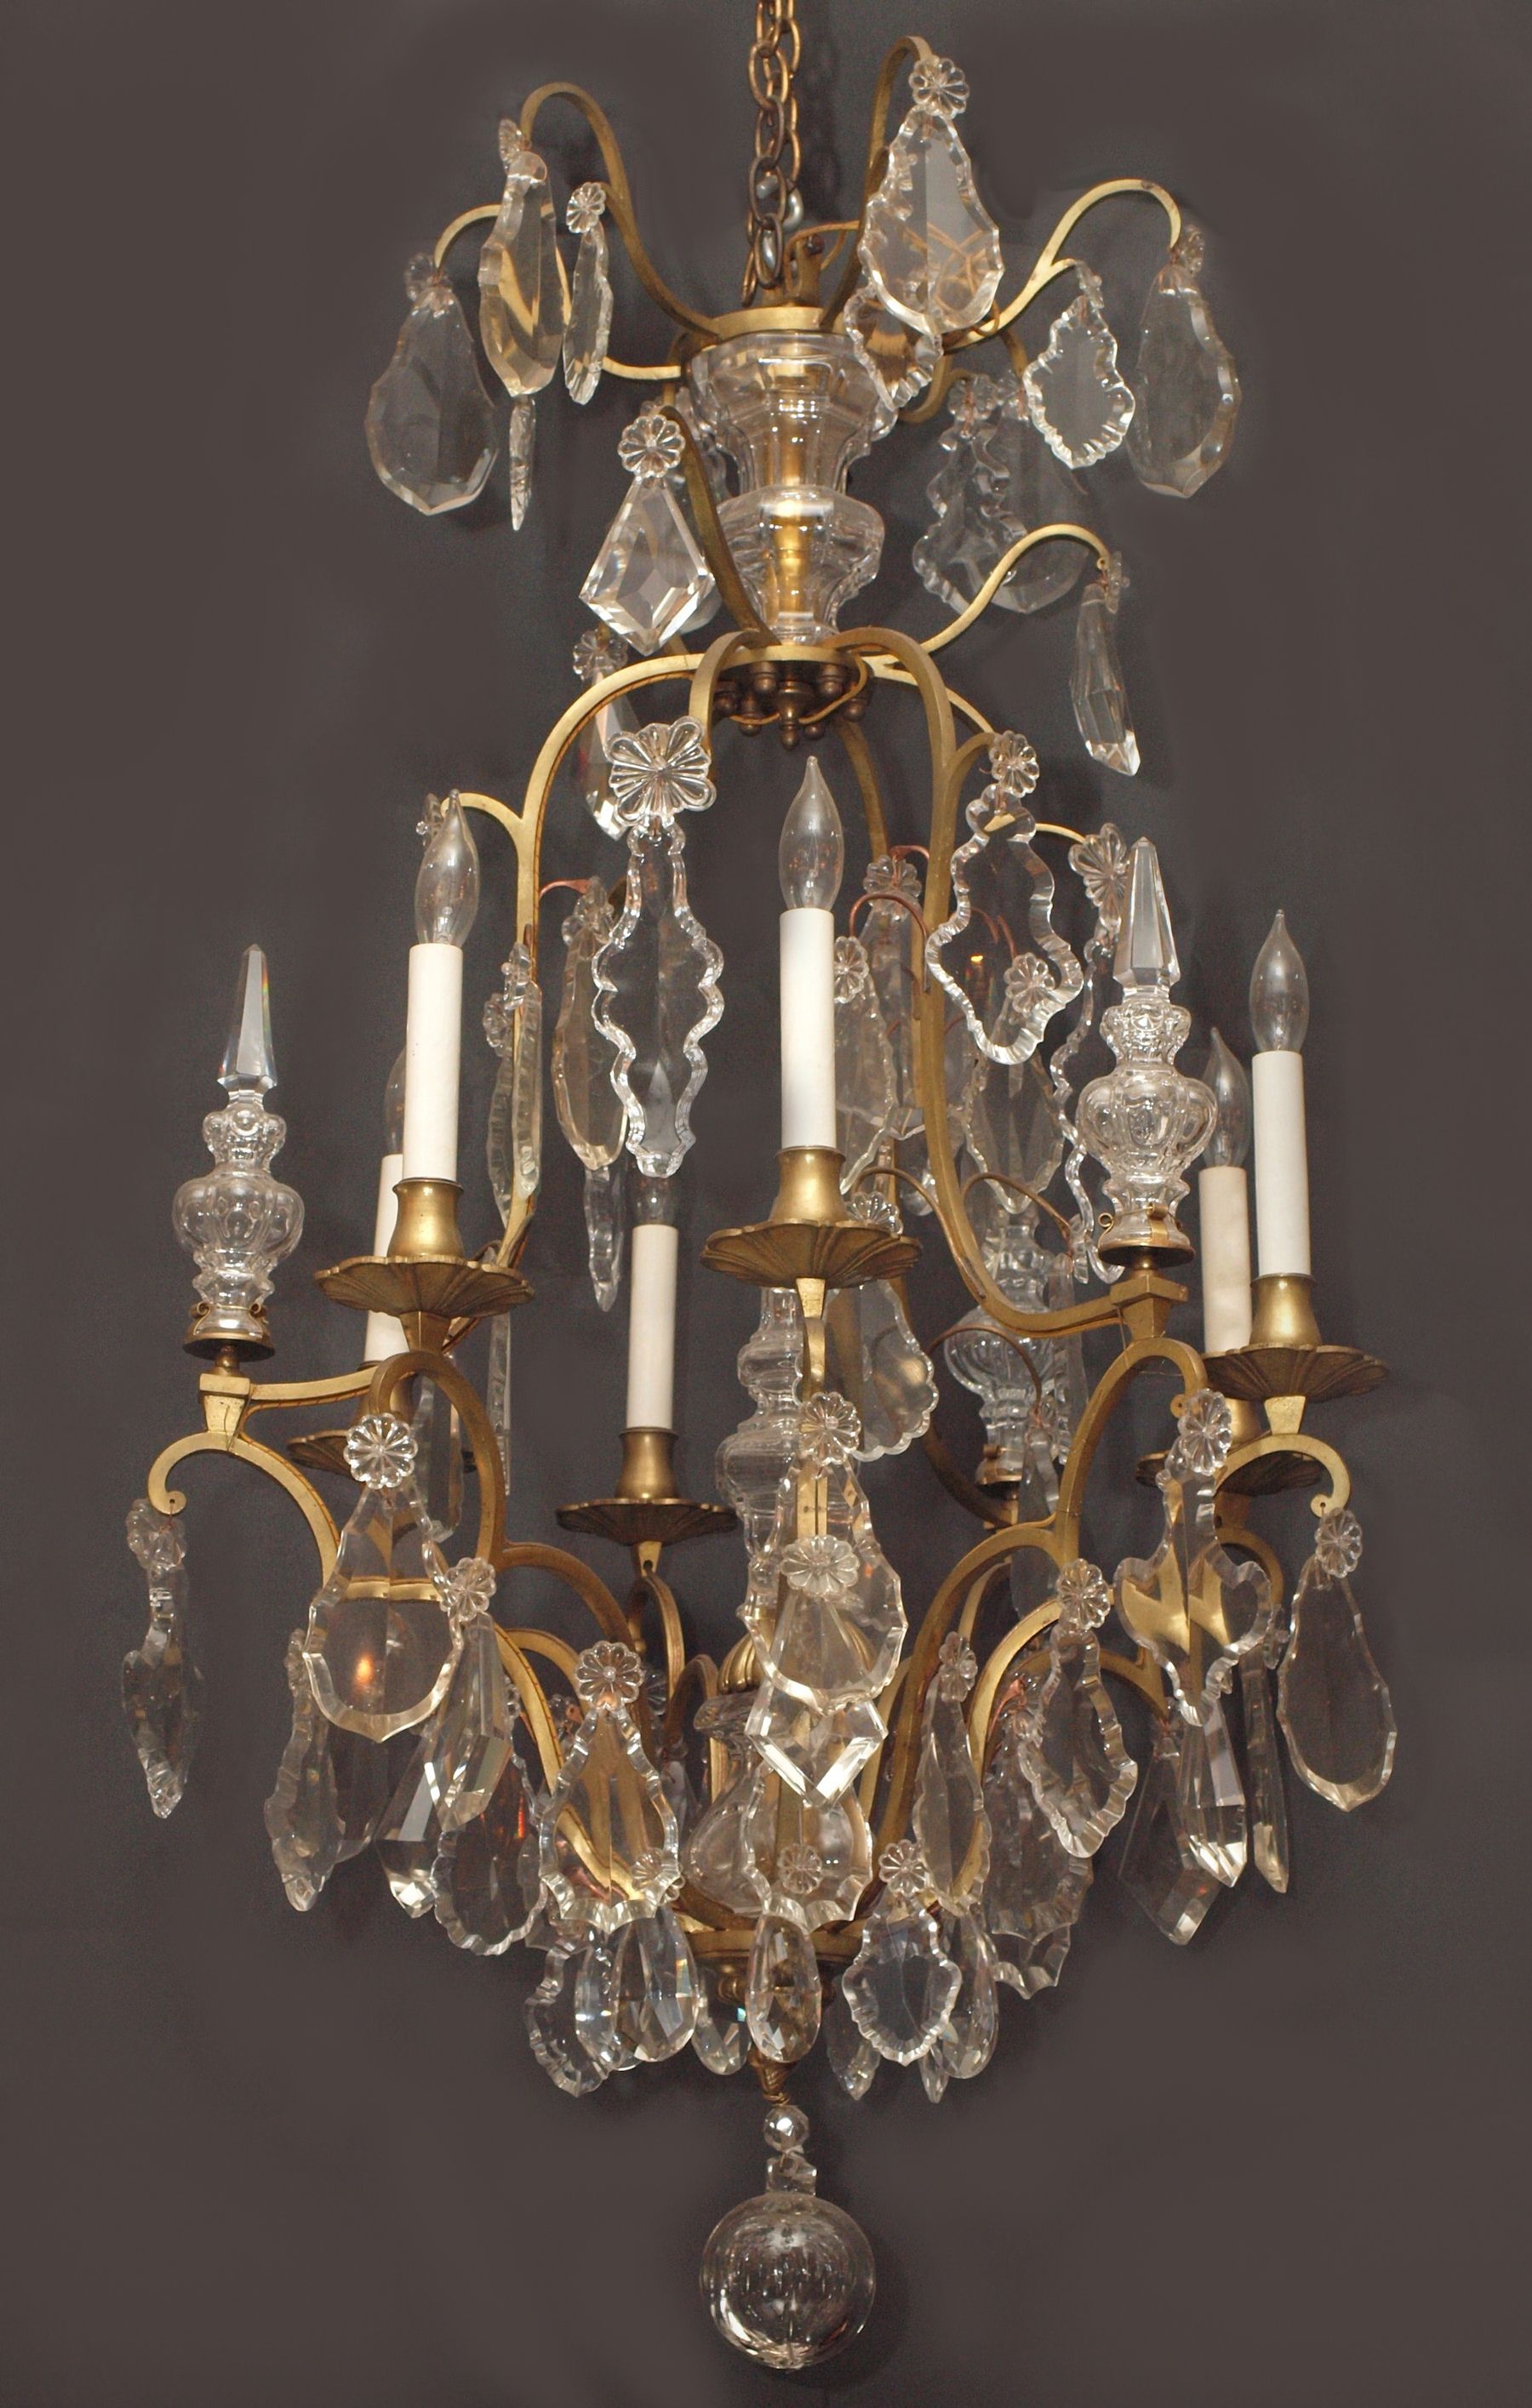 Antiques Classifieds Antiques Antique Lamps And Lighting Throughout Antique French Chandeliers (Photo 11 of 12)